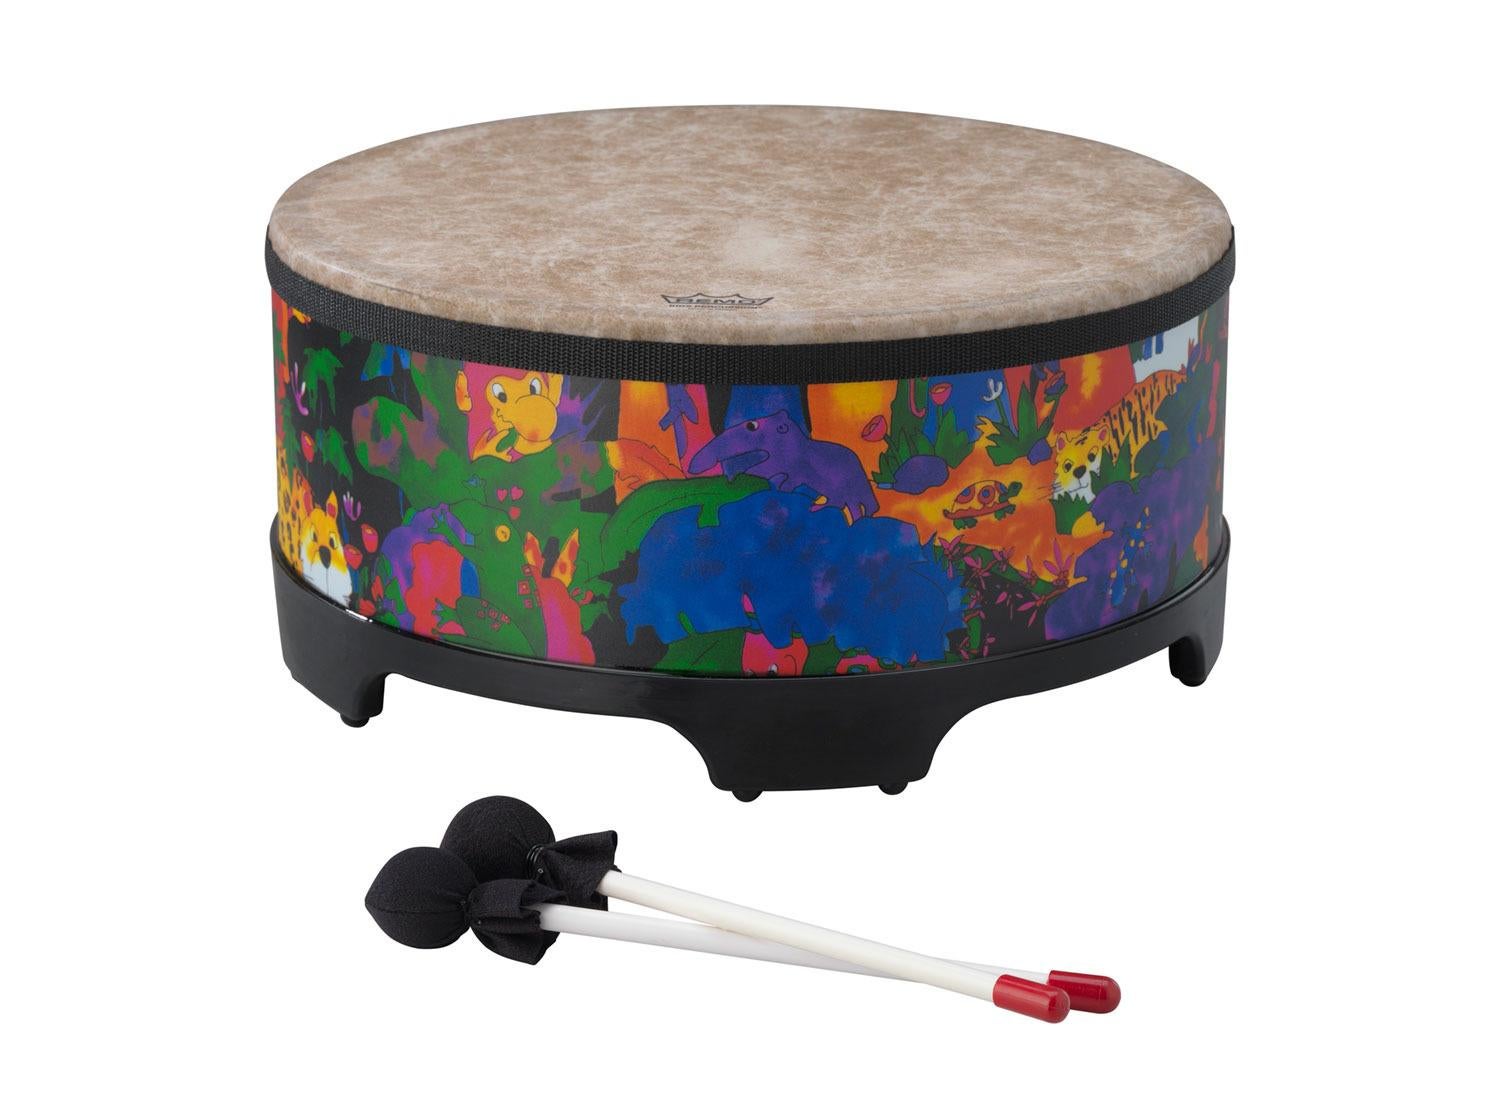 Remo Kids Percussion Gathering Drum (8"x16") - image 1 of 2